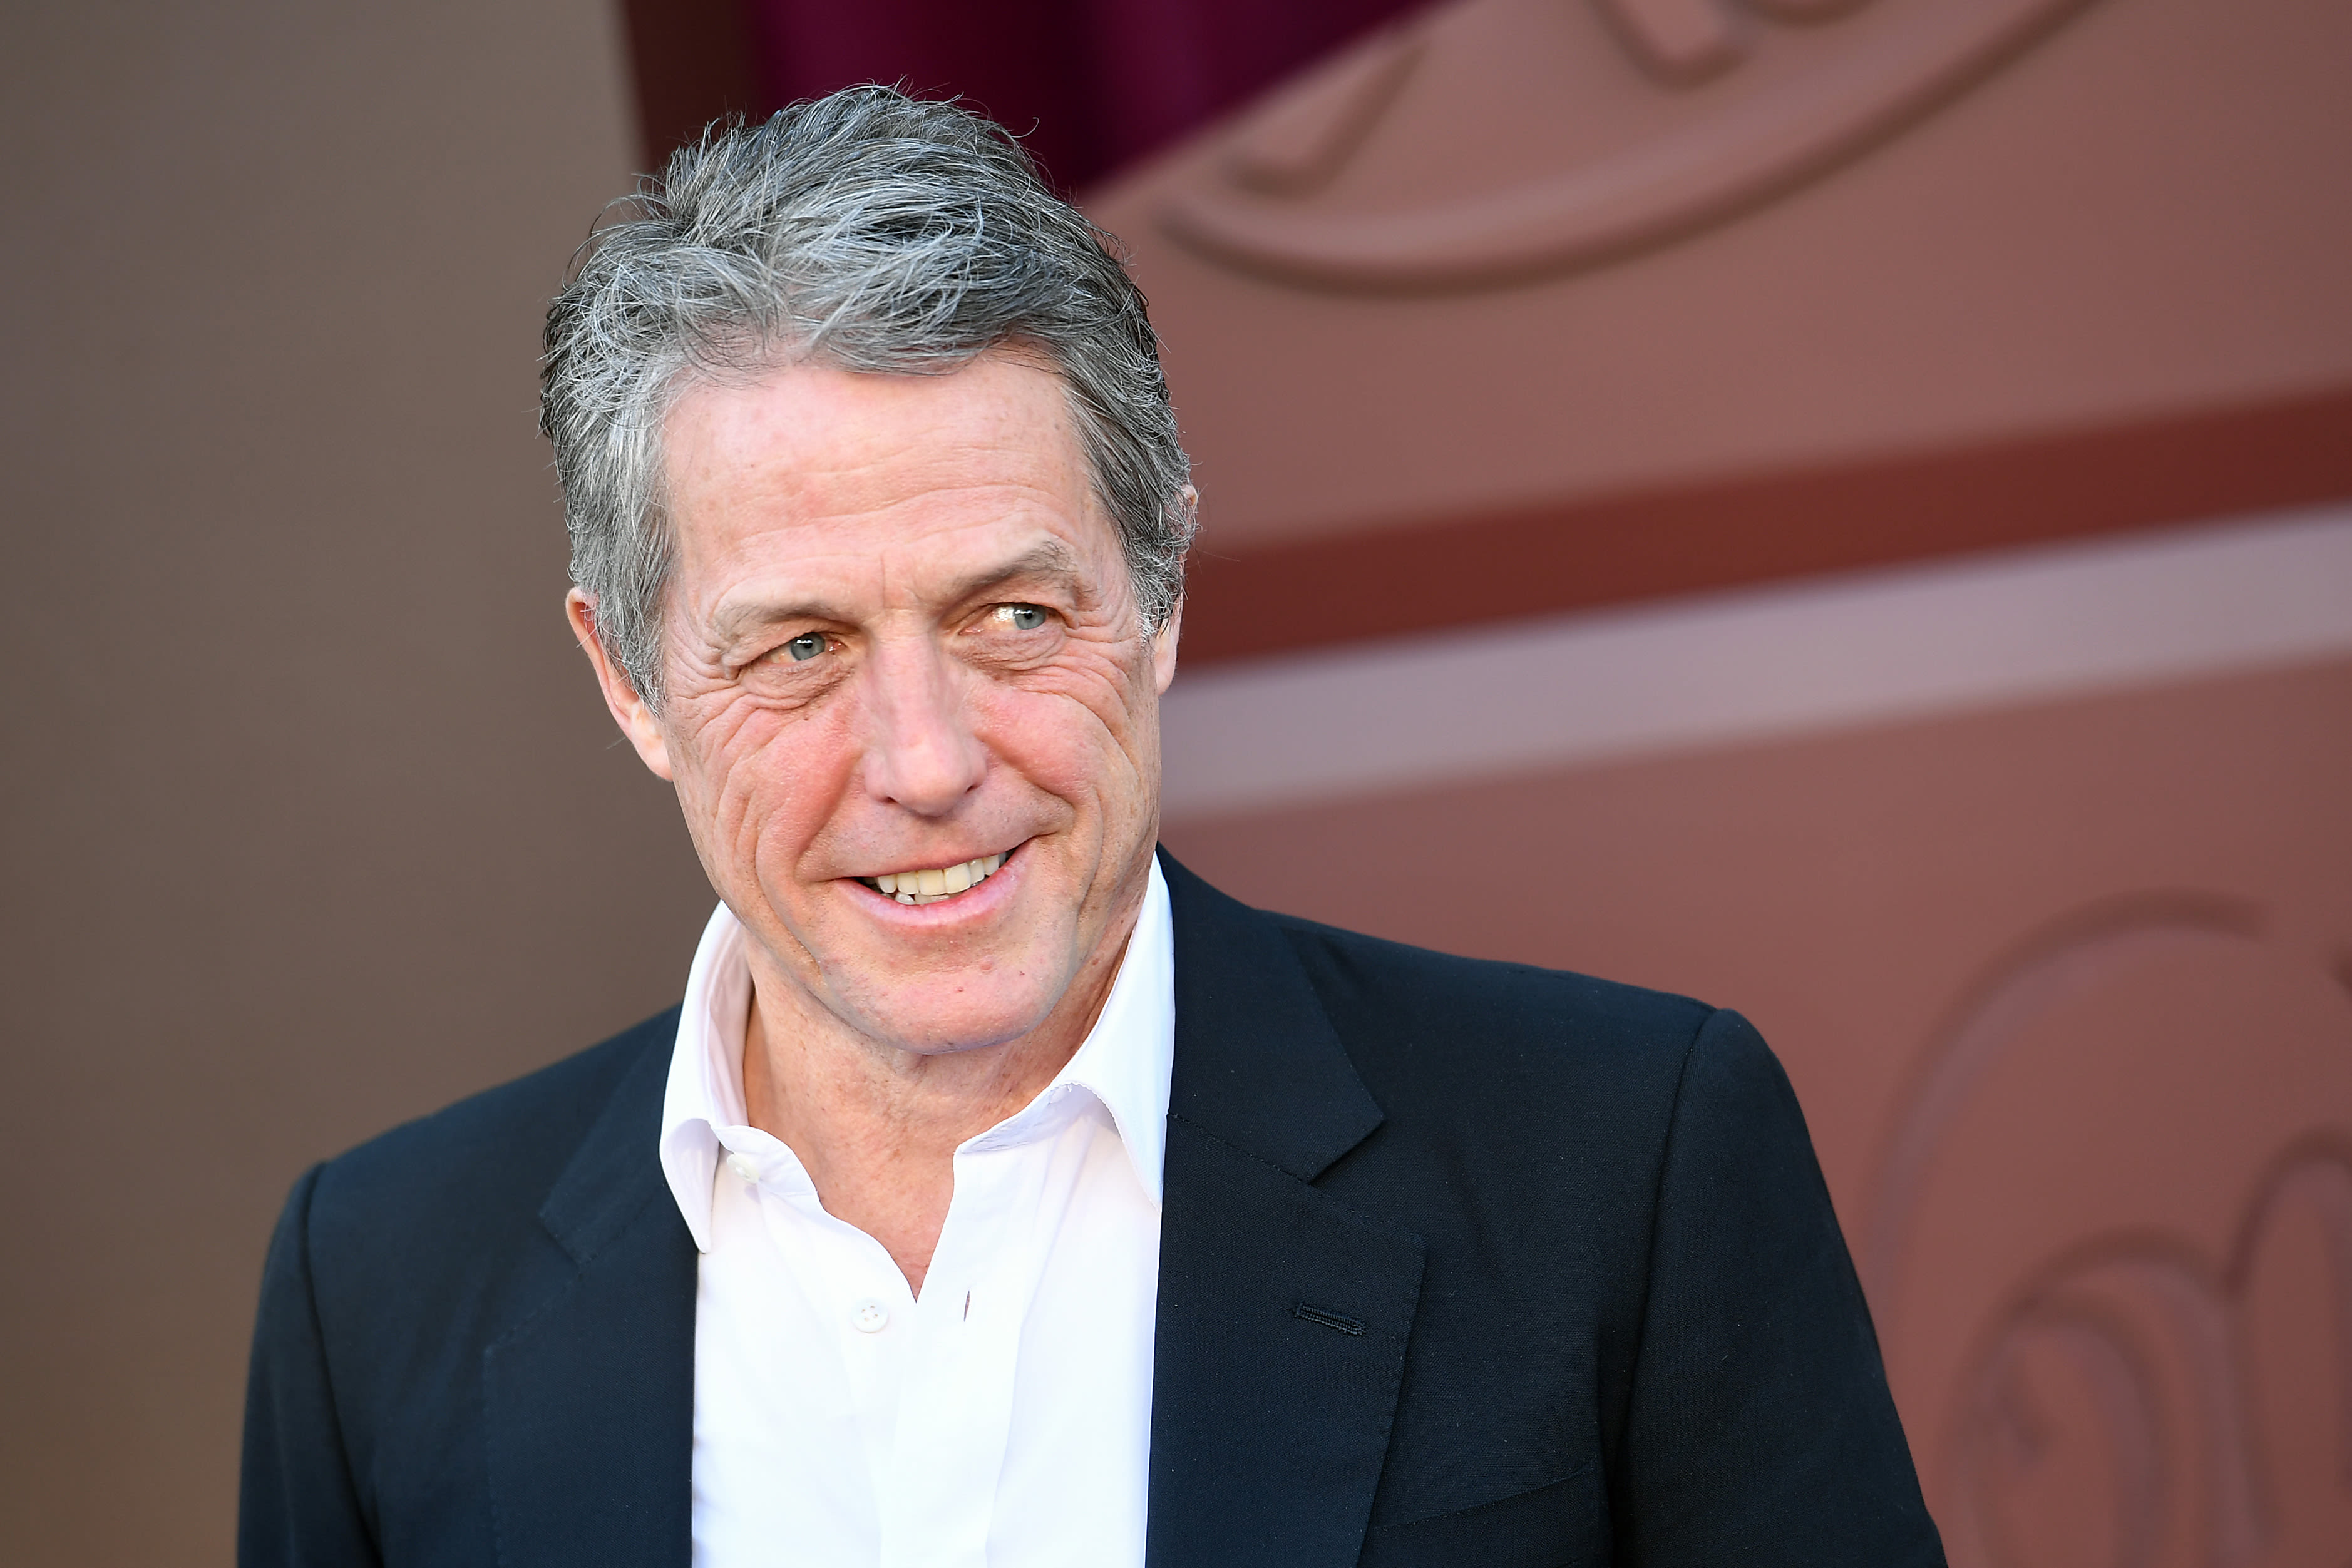 Hugh Grant Rails Against Closure Of Local Picturehouse Cinema: “Let’s All Sit At Home And Watch ‘Content’… While Scrolling...